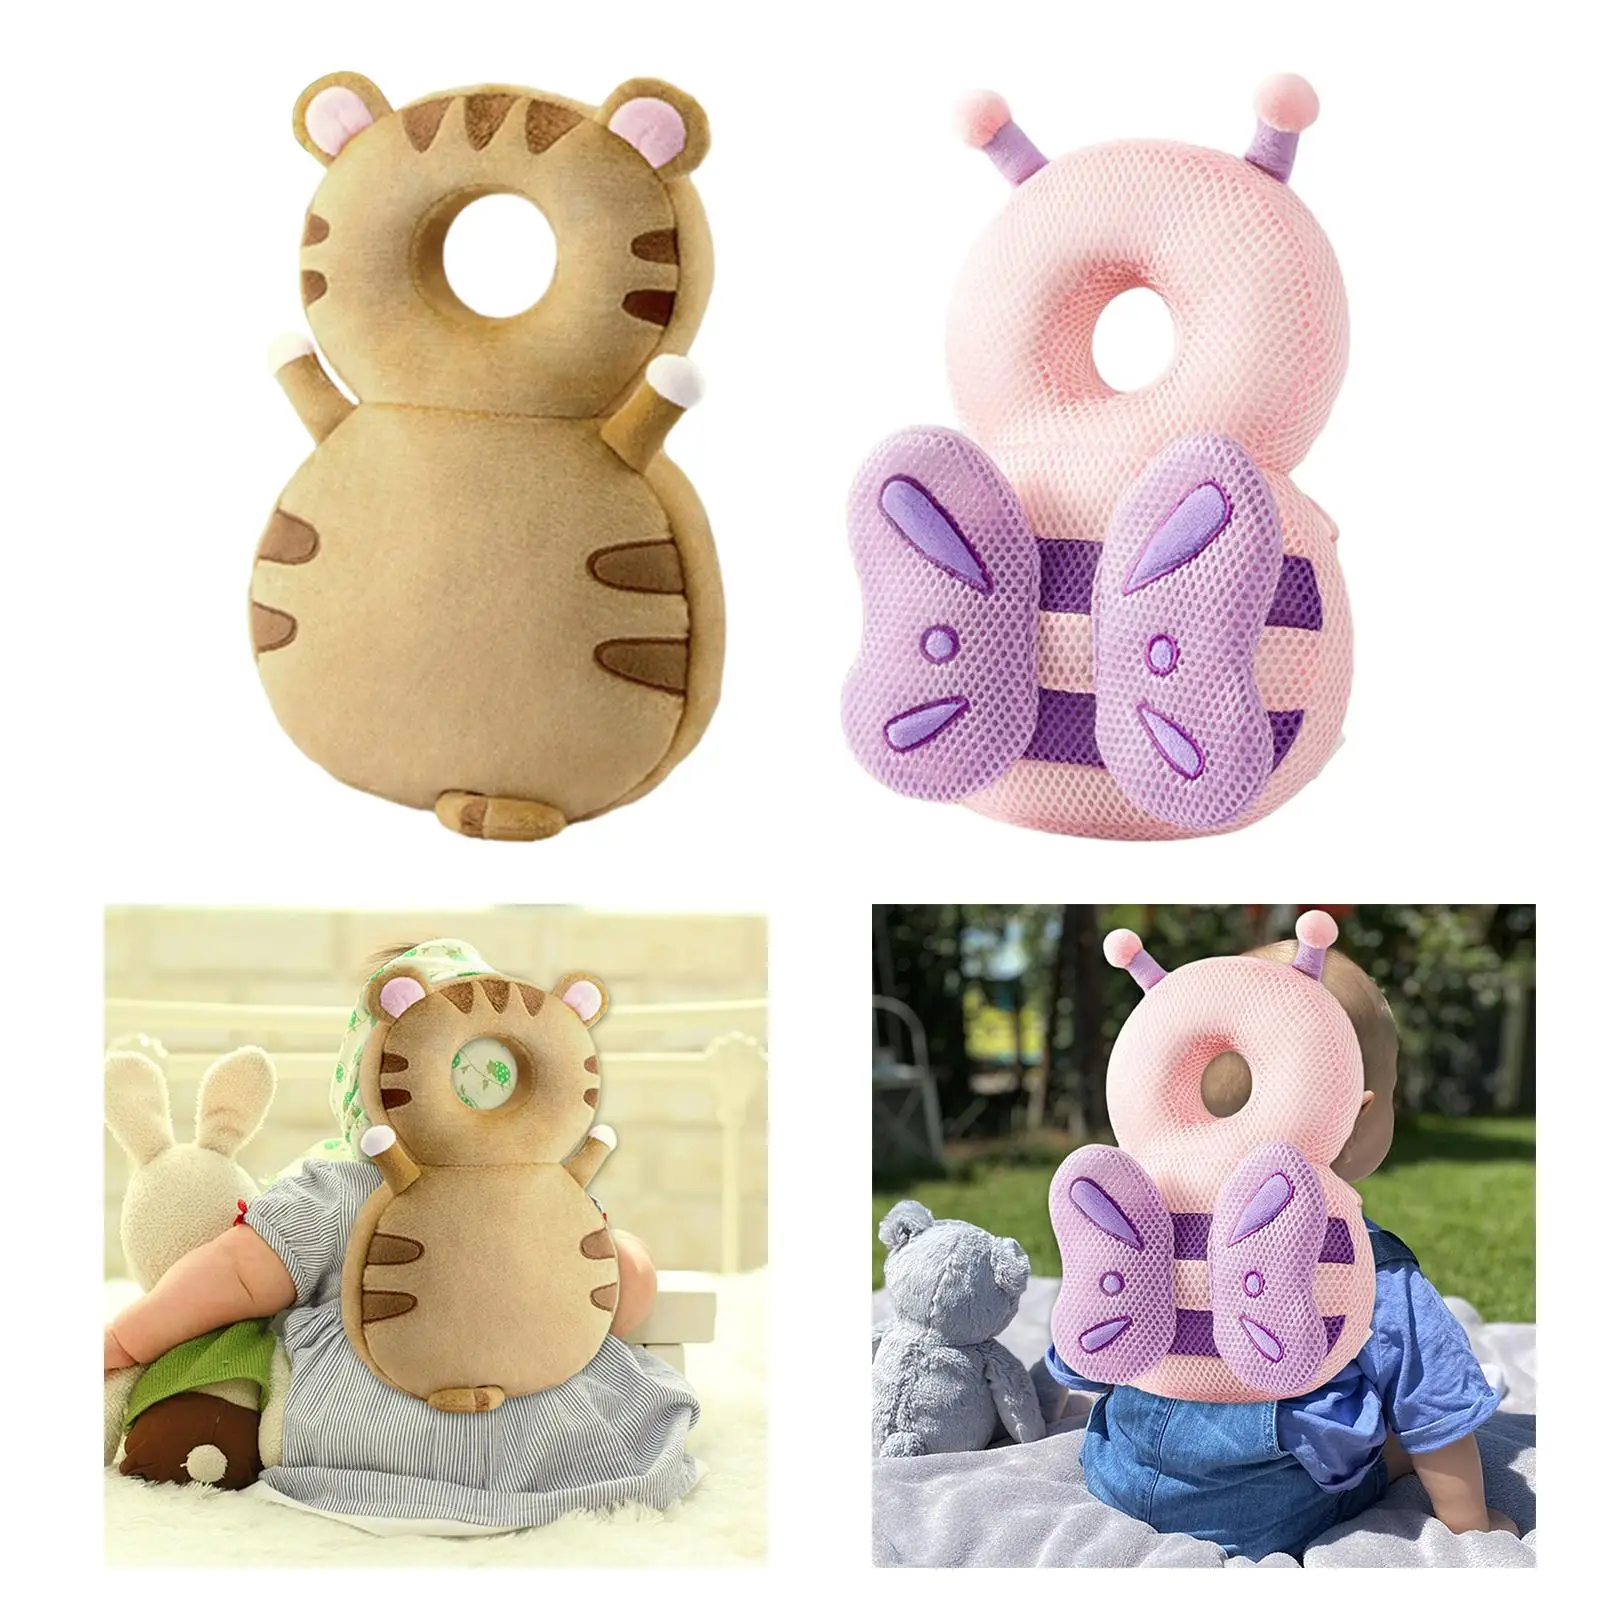 Baby Back Protection Cute Headrest Soft Protection Safe Pad Baby Walker Head Protector Backpack Wear for Crawling Infant Kids